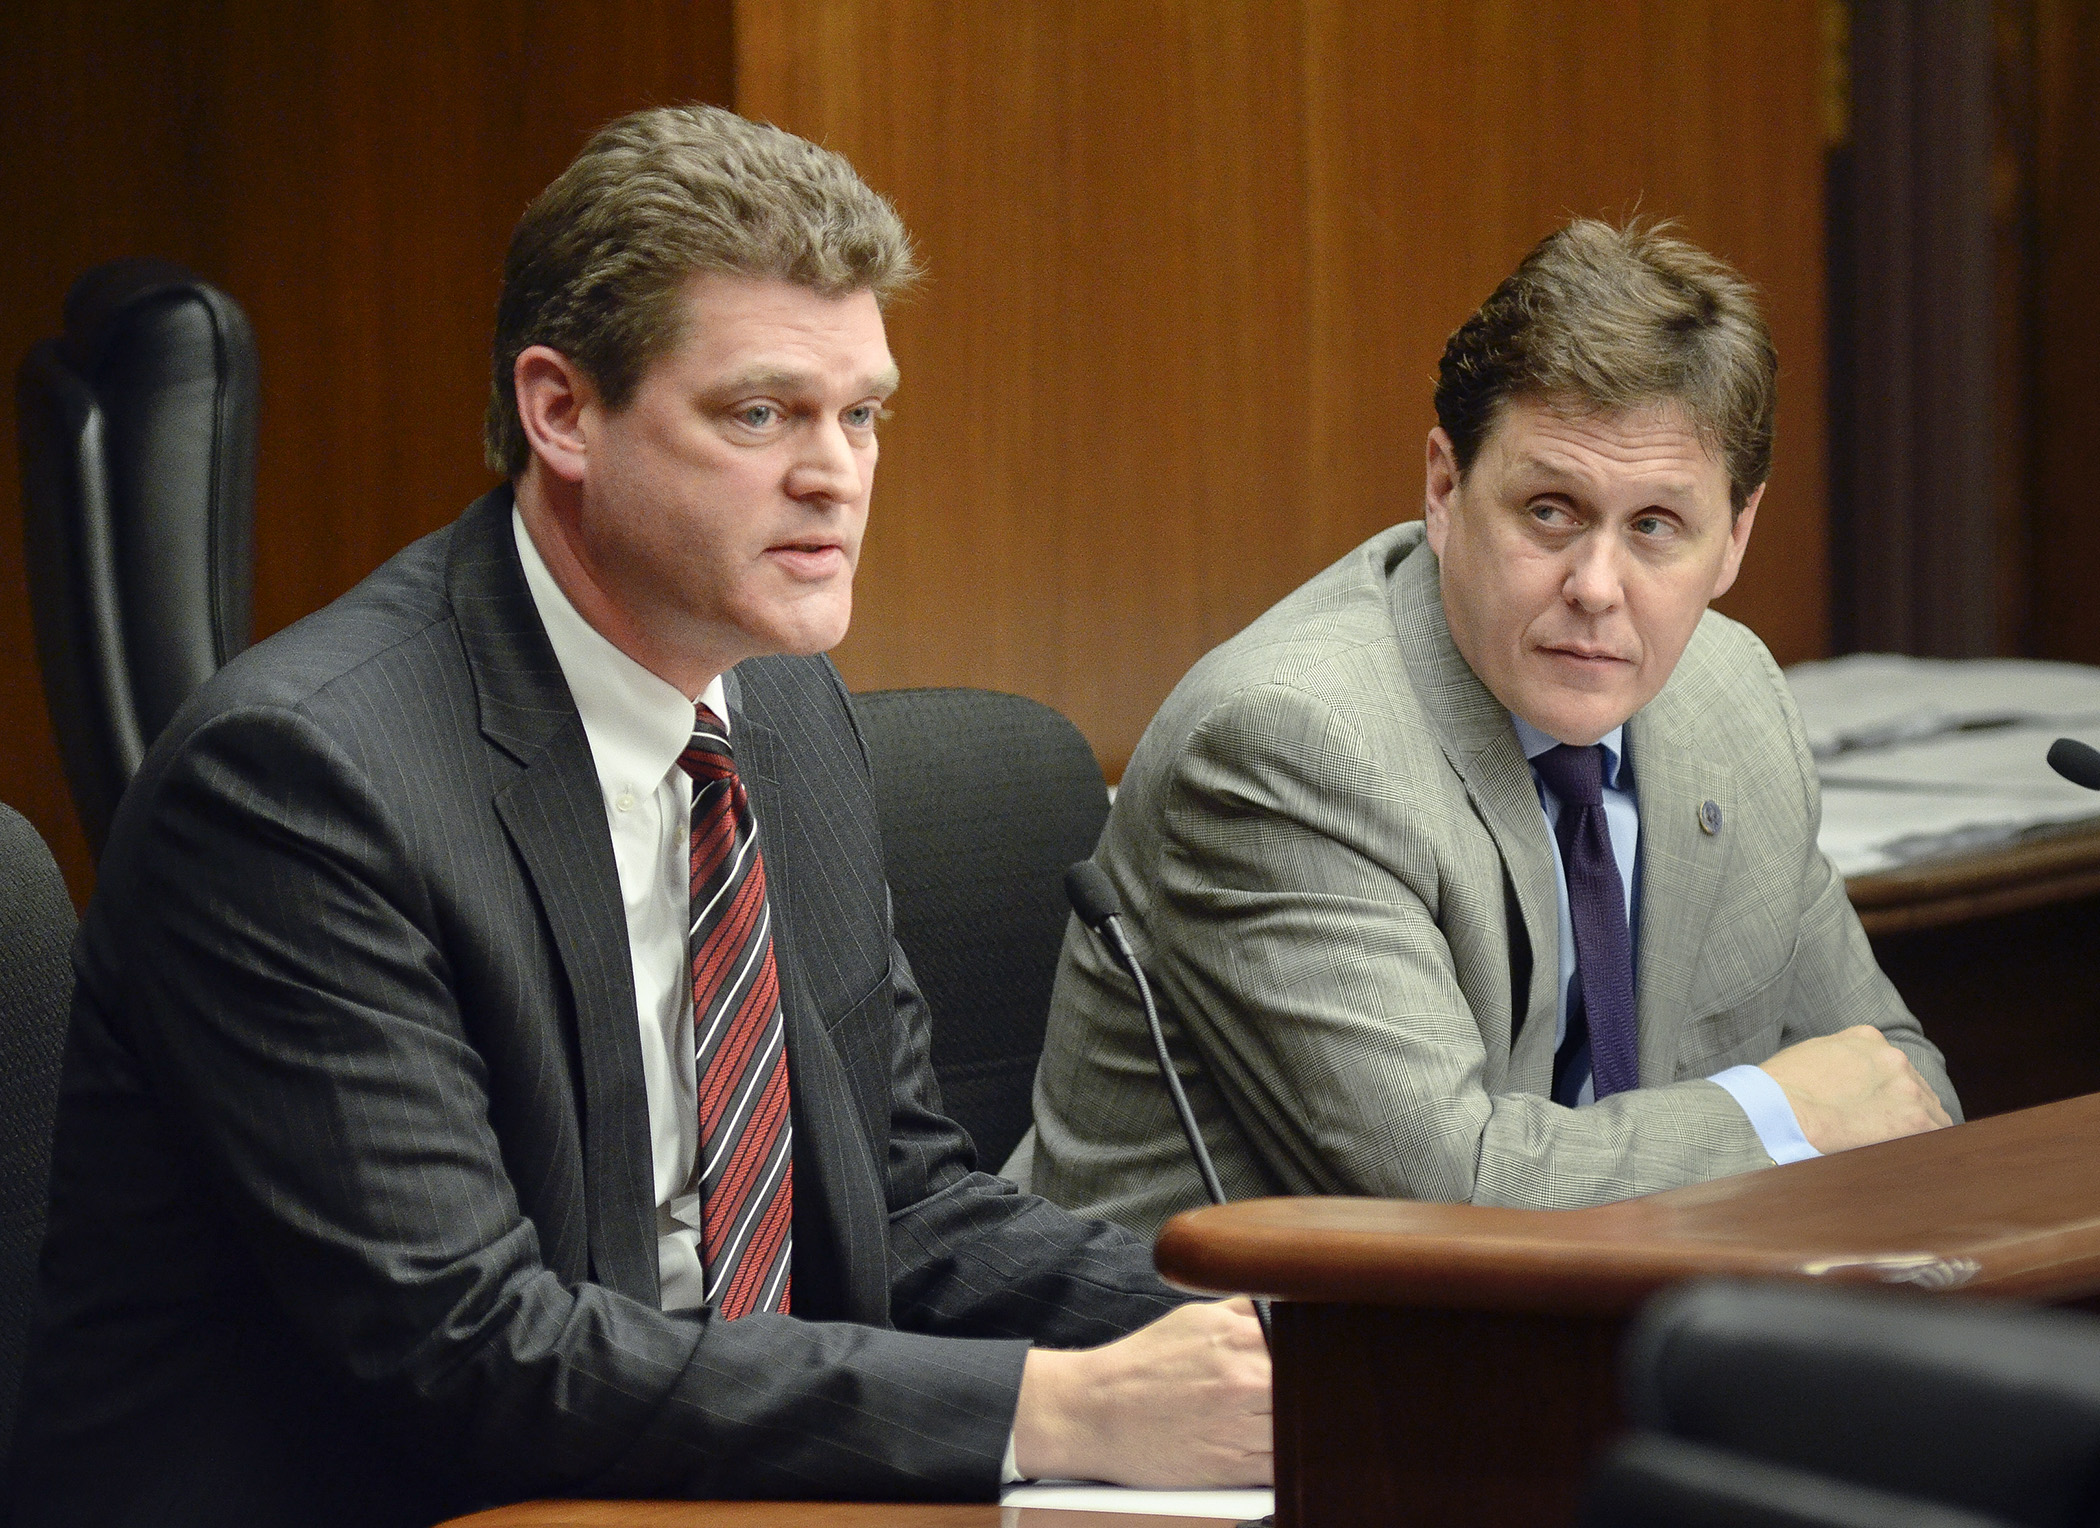 Dr. Paul Kettler, vice president of medical affairs at Unity Hospital, left, testifies before the House Health and Human Services Finance Committee Jan. 27 on a bill that would provide deficiency funding. Rep. Matt Dean, right, the committee chair, listens to the testimony. Photo by Andrew VonBank